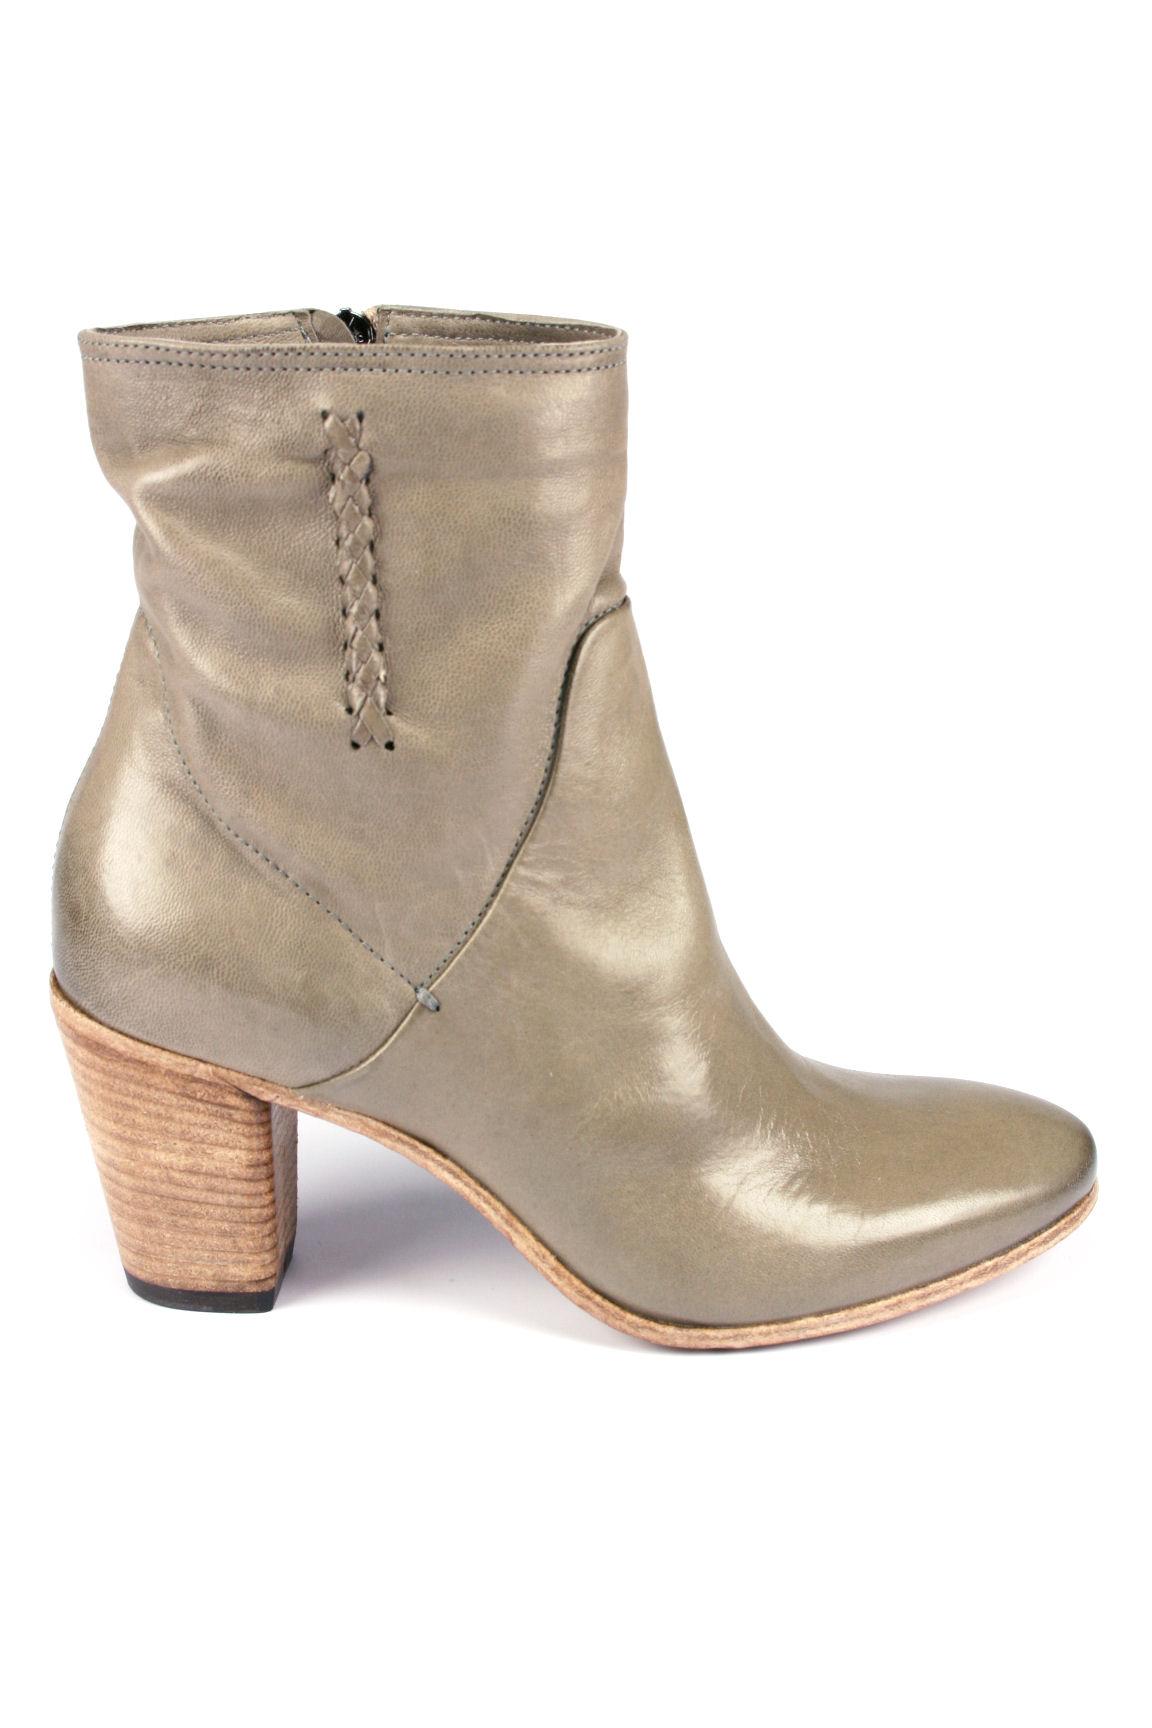 Monument Jeg vil have hævn Ankle Boots Grey Pearl ALBERTO FERMANI Ankle Boots / Boots